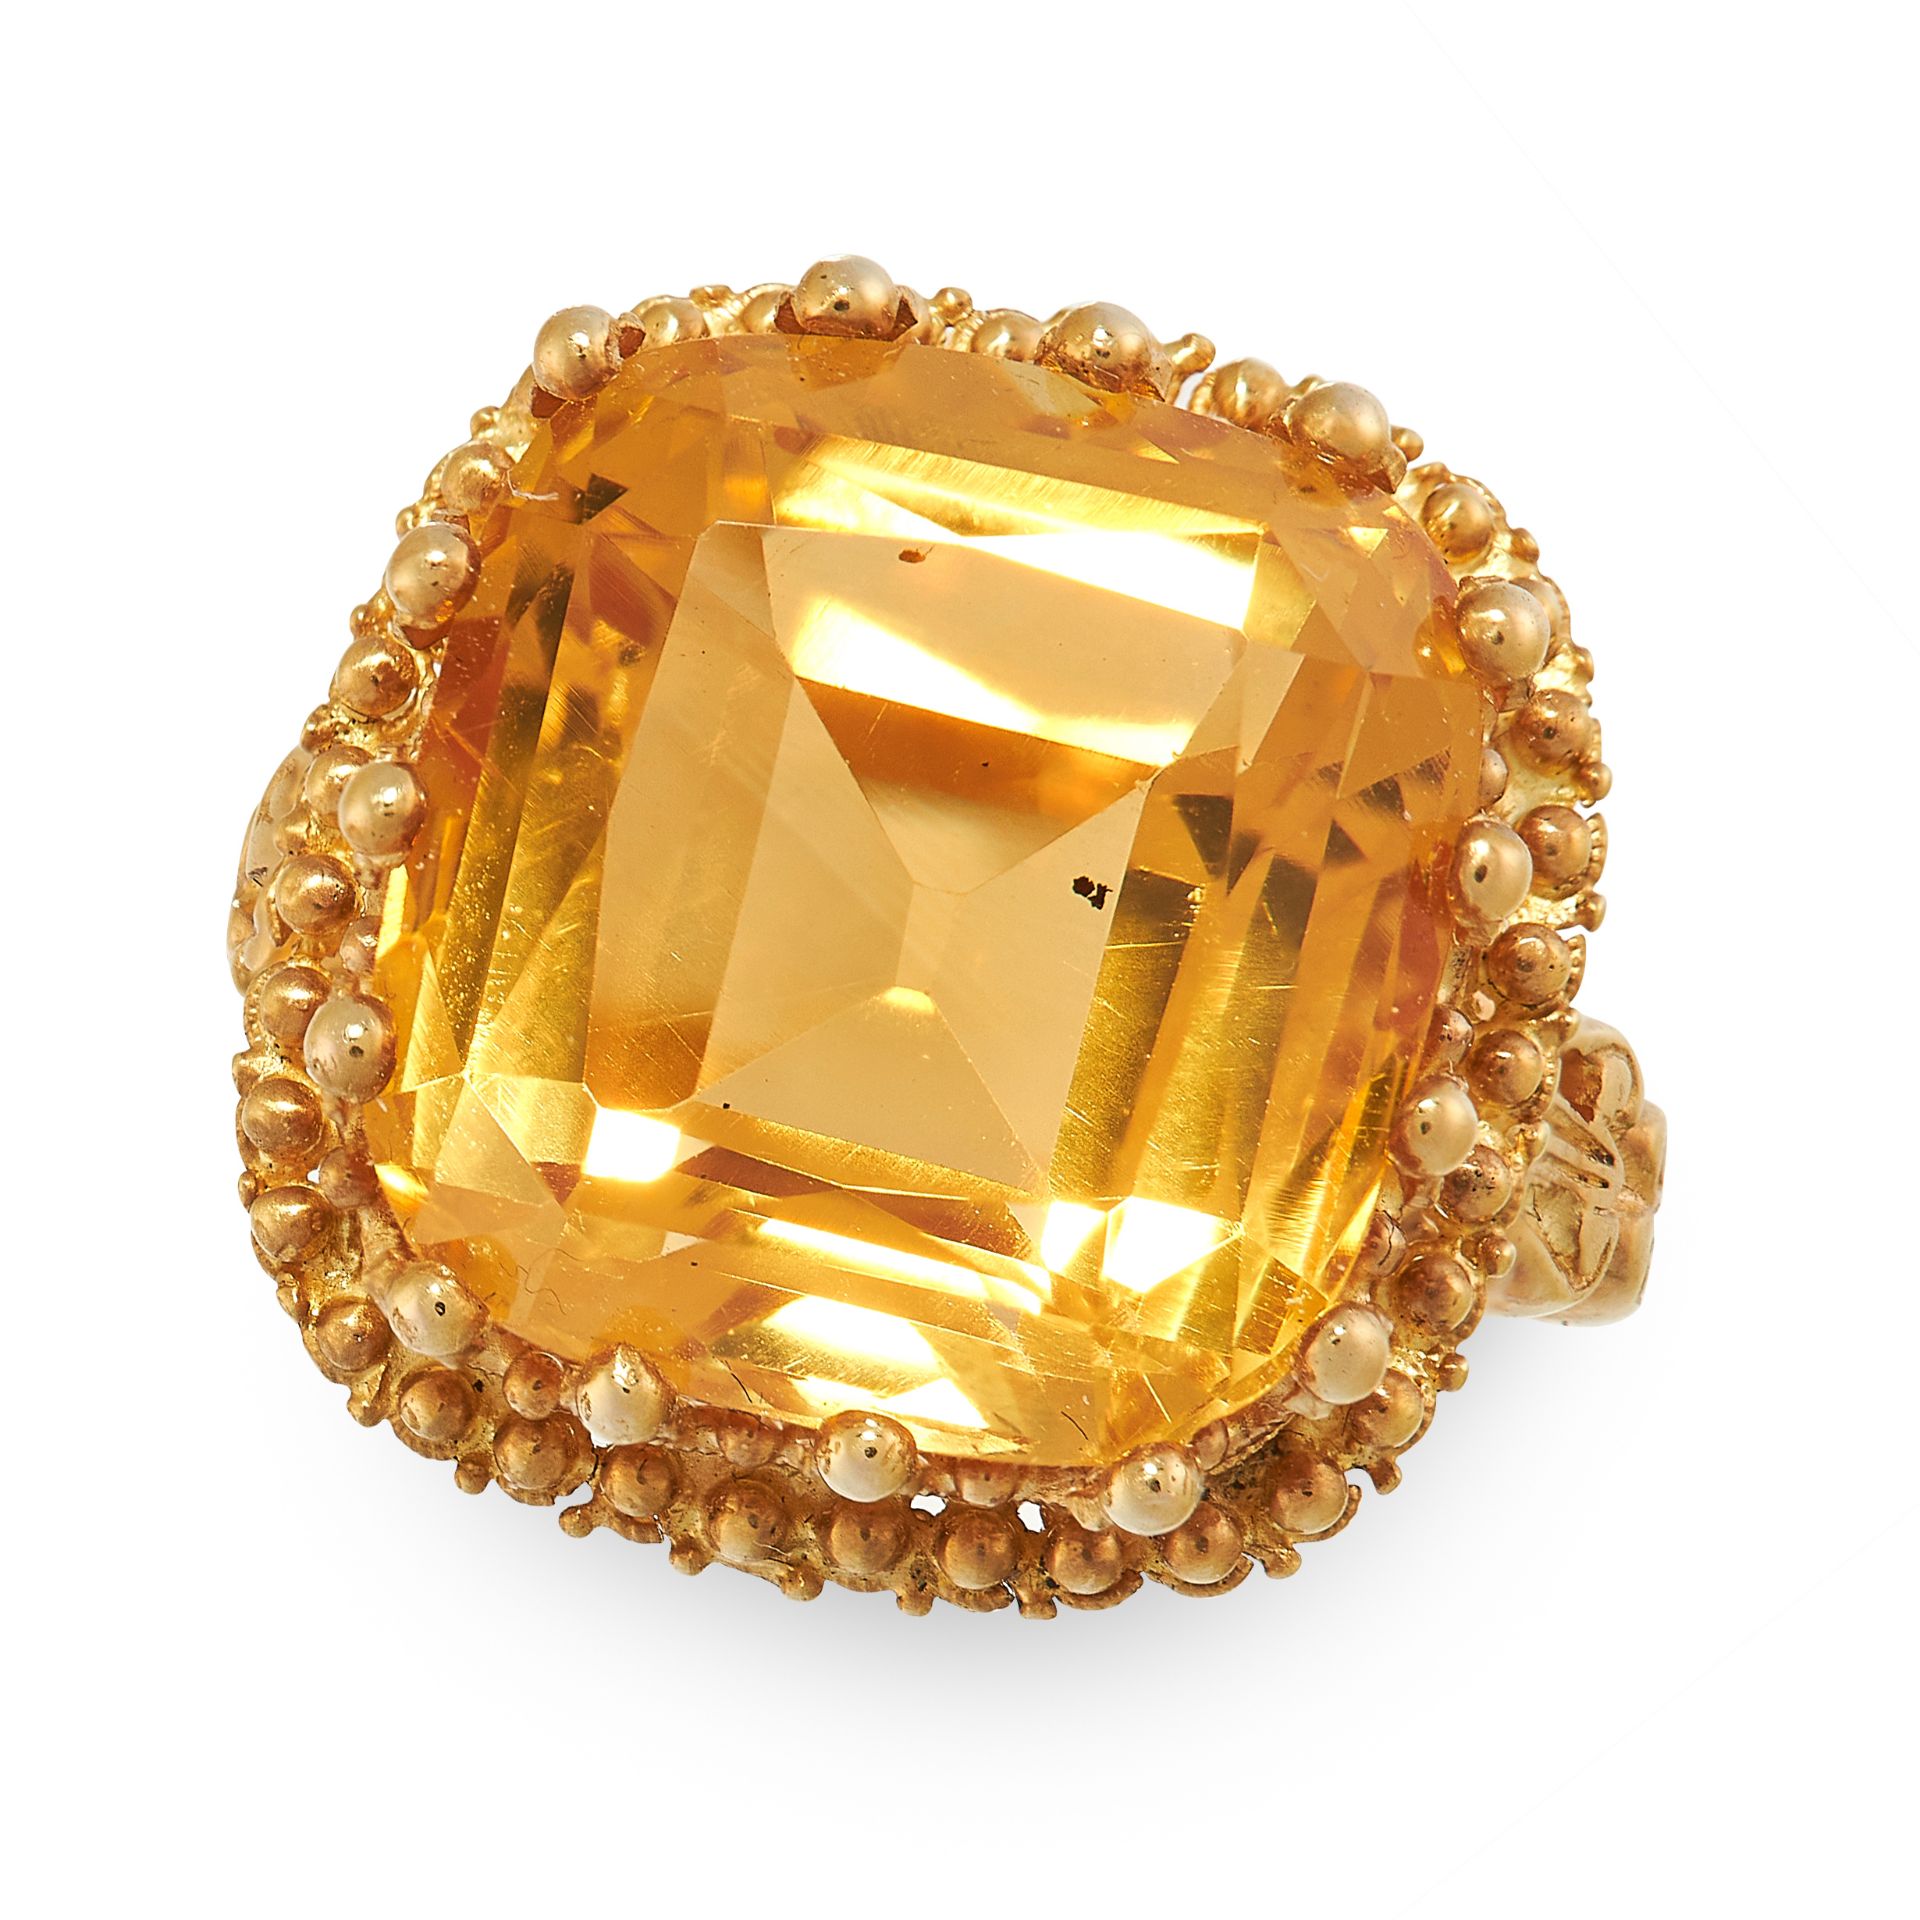 CITRINE DRESS RING comprising of a cushion cut citrine of 8.44 carats in beaded border, with